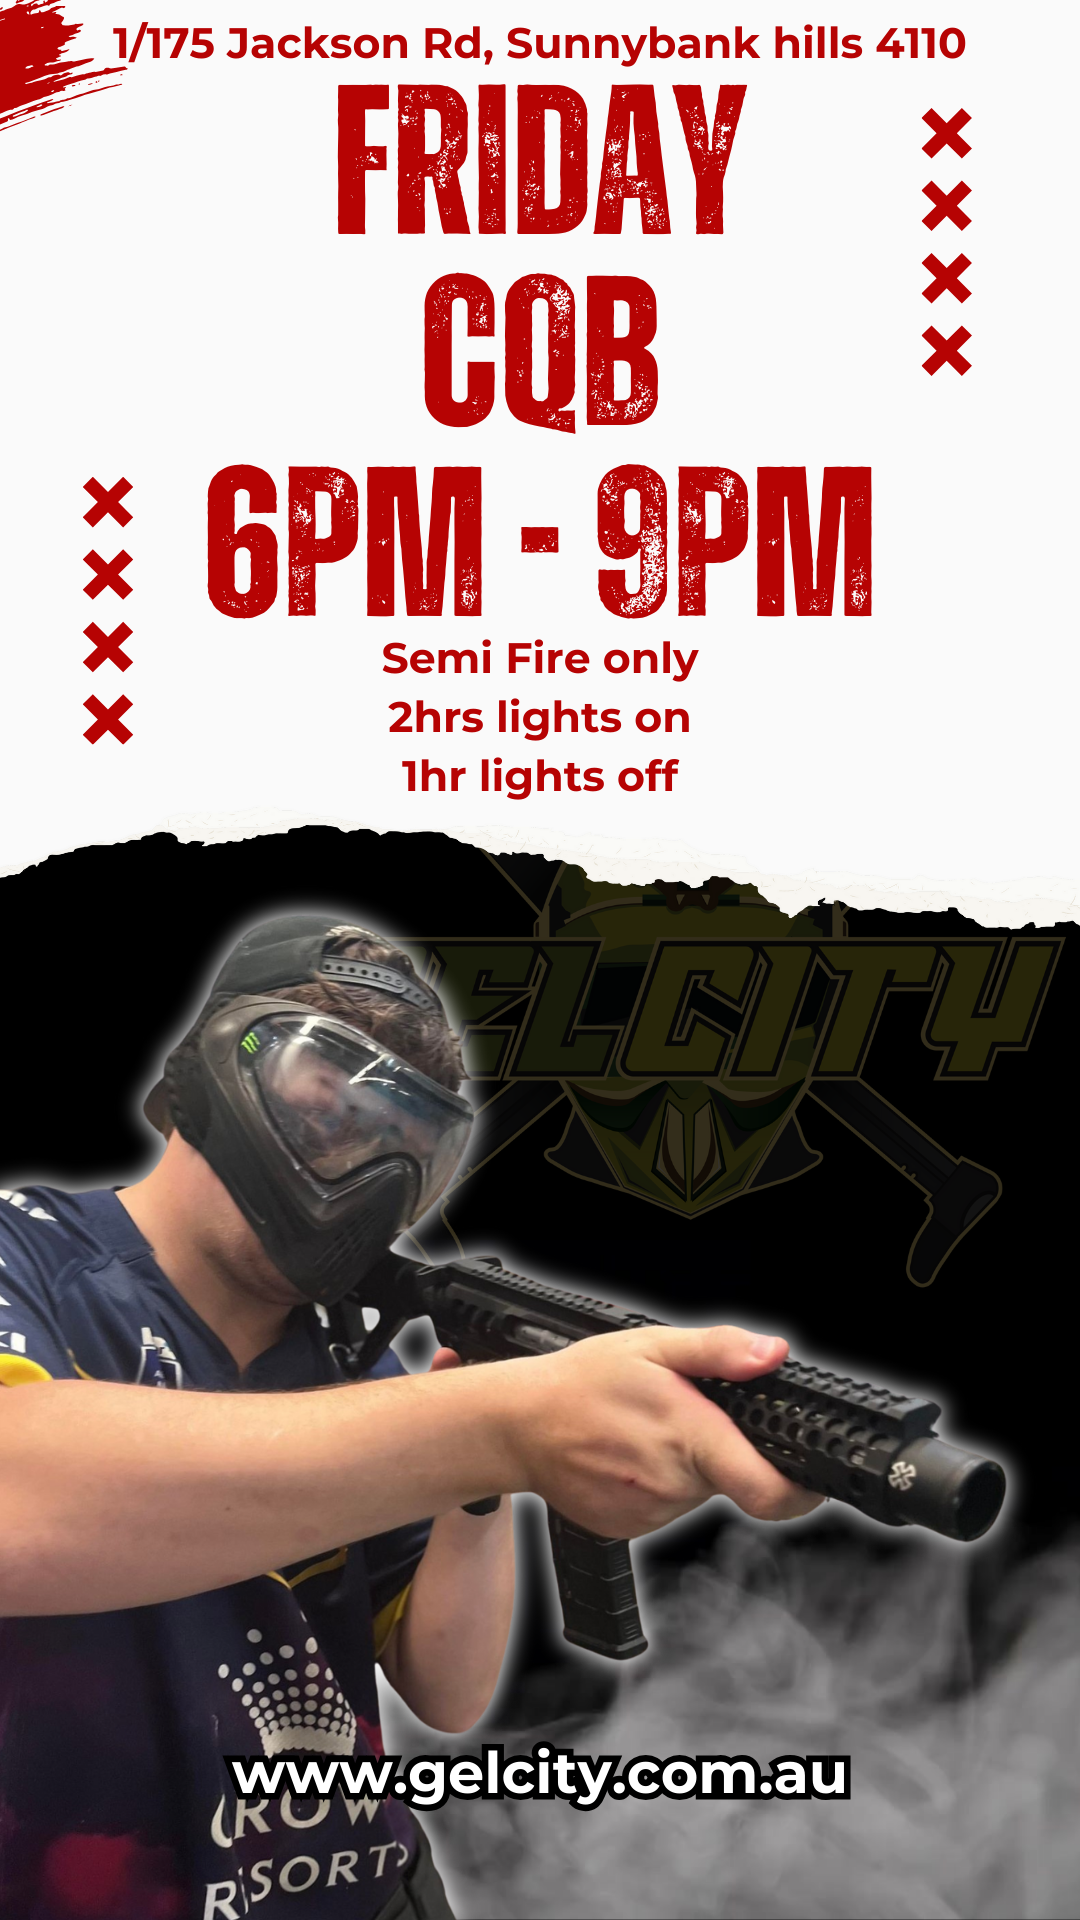 FRIDAY LIGHTS OUT CQB SEMI FIRE ONLY SESSION 6PM - 9PM - 2024